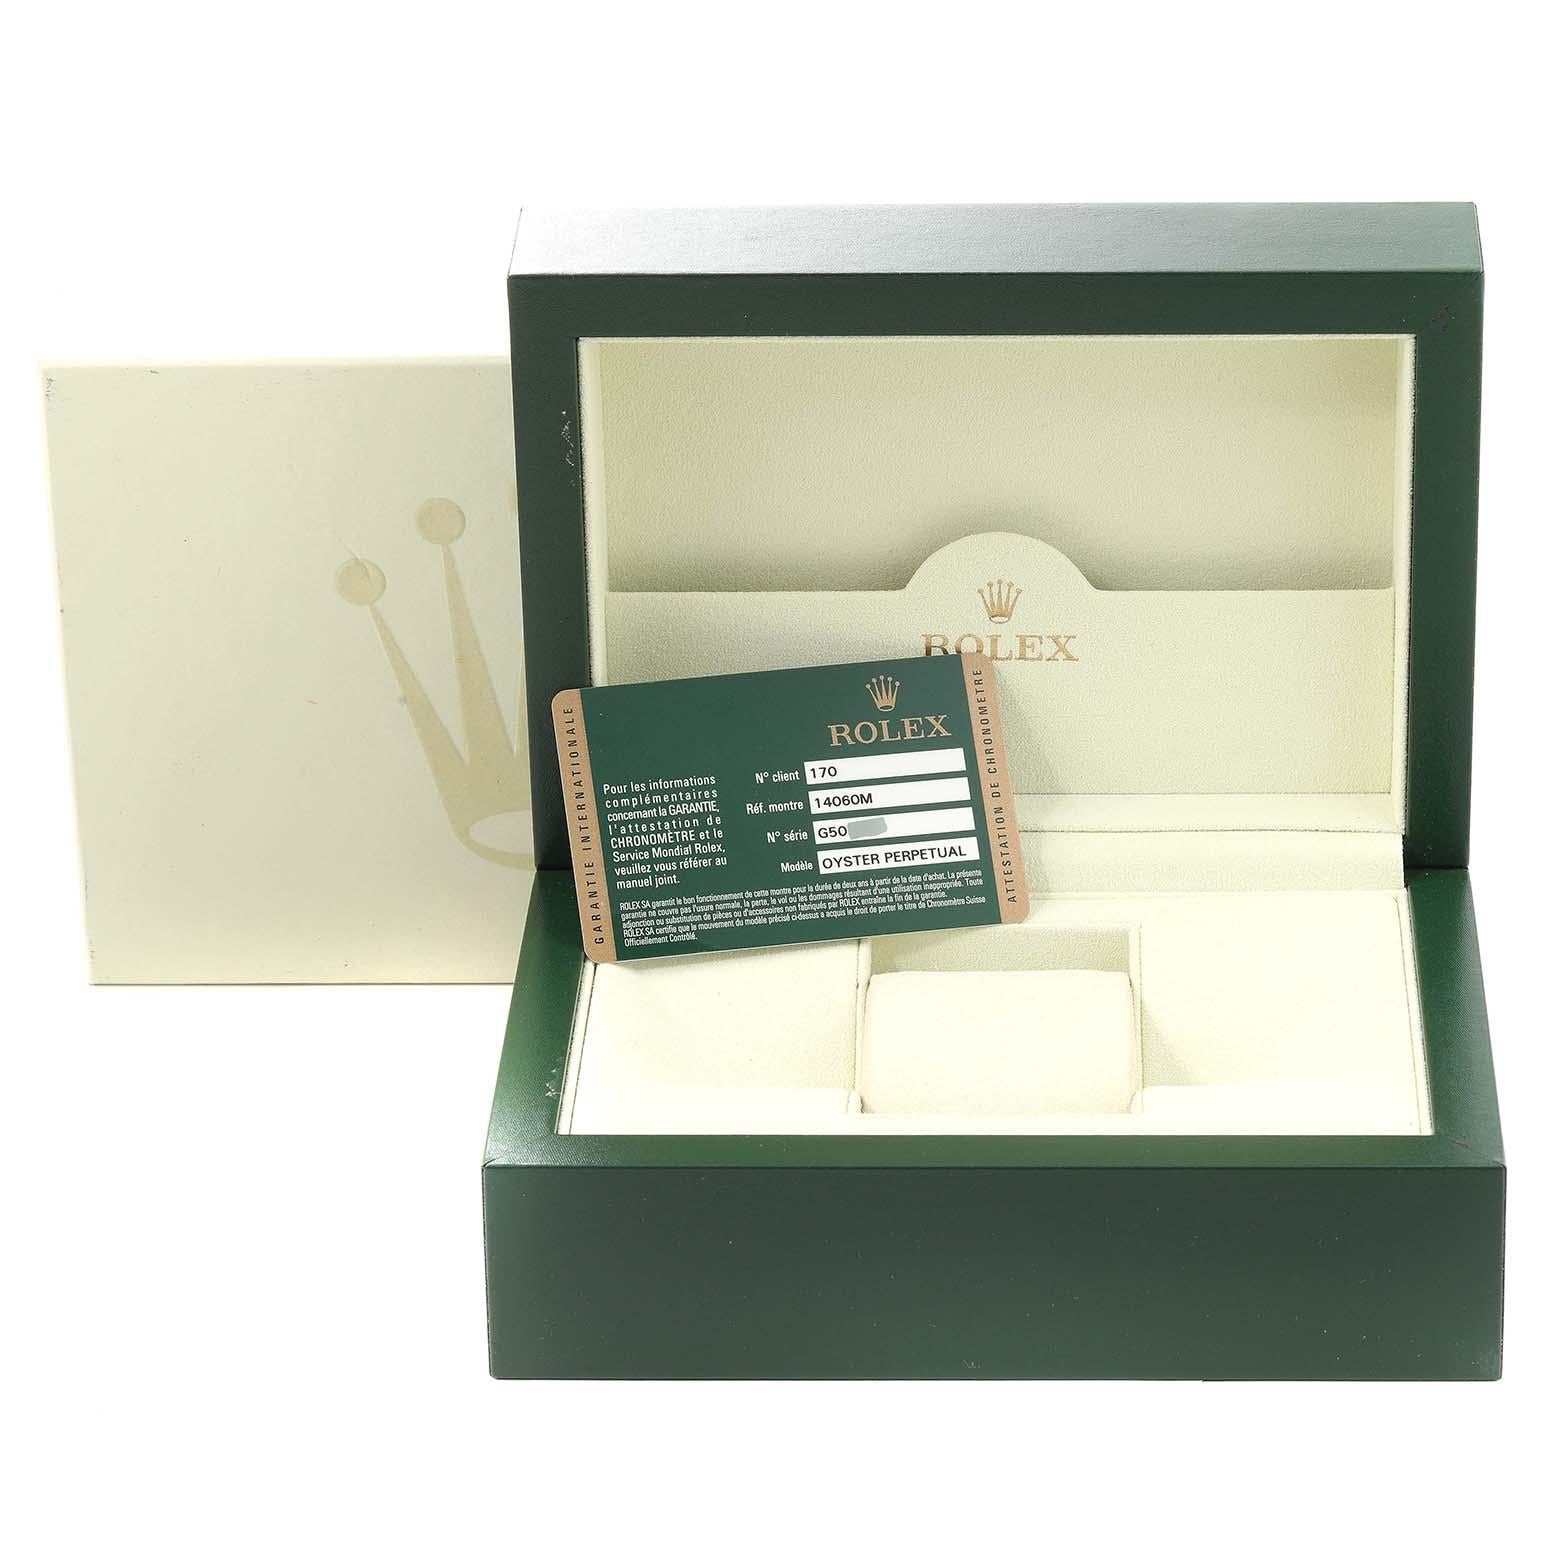 Rolex Submariner No Date 40mm 4 Liner Steel Mens Watch 14060 Box Card For Sale 8